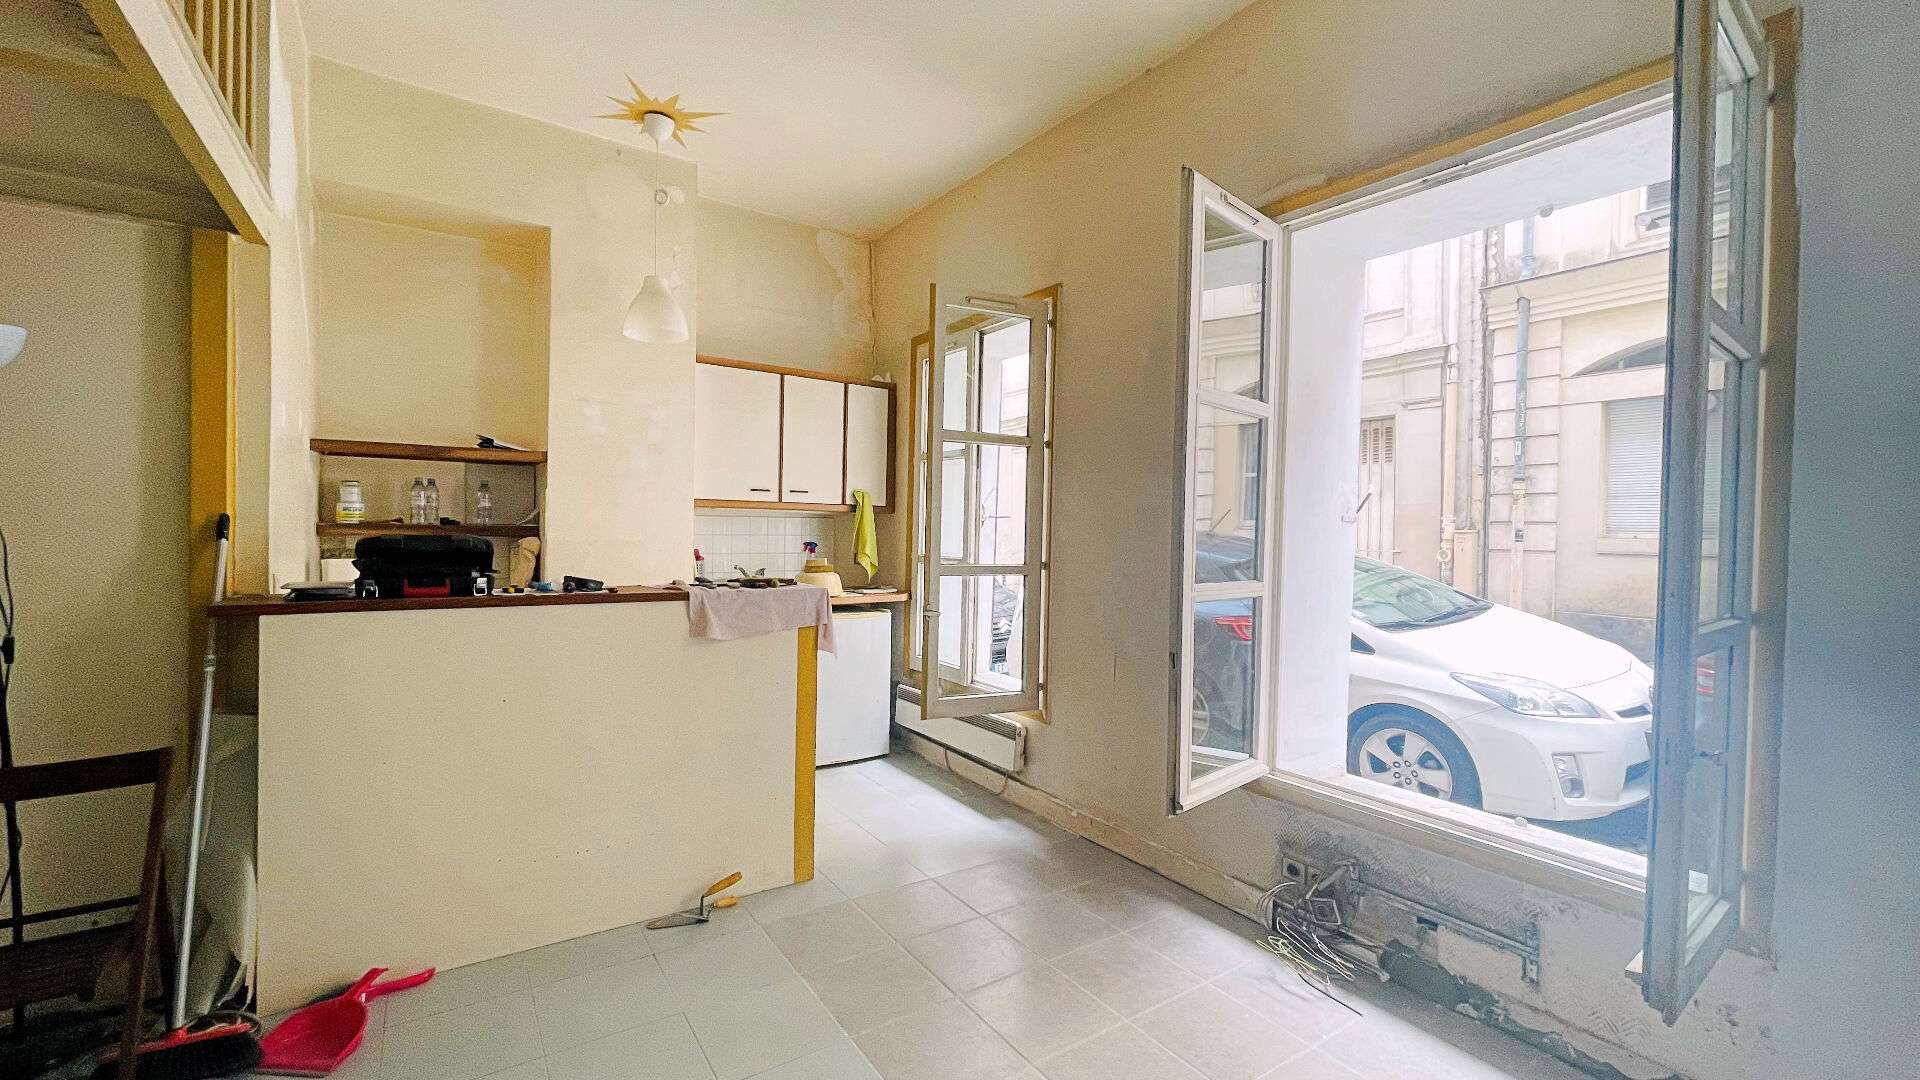 Good deal: 45 m² modernizing apartment in the heart of the abbesses in Monamrtre! 4